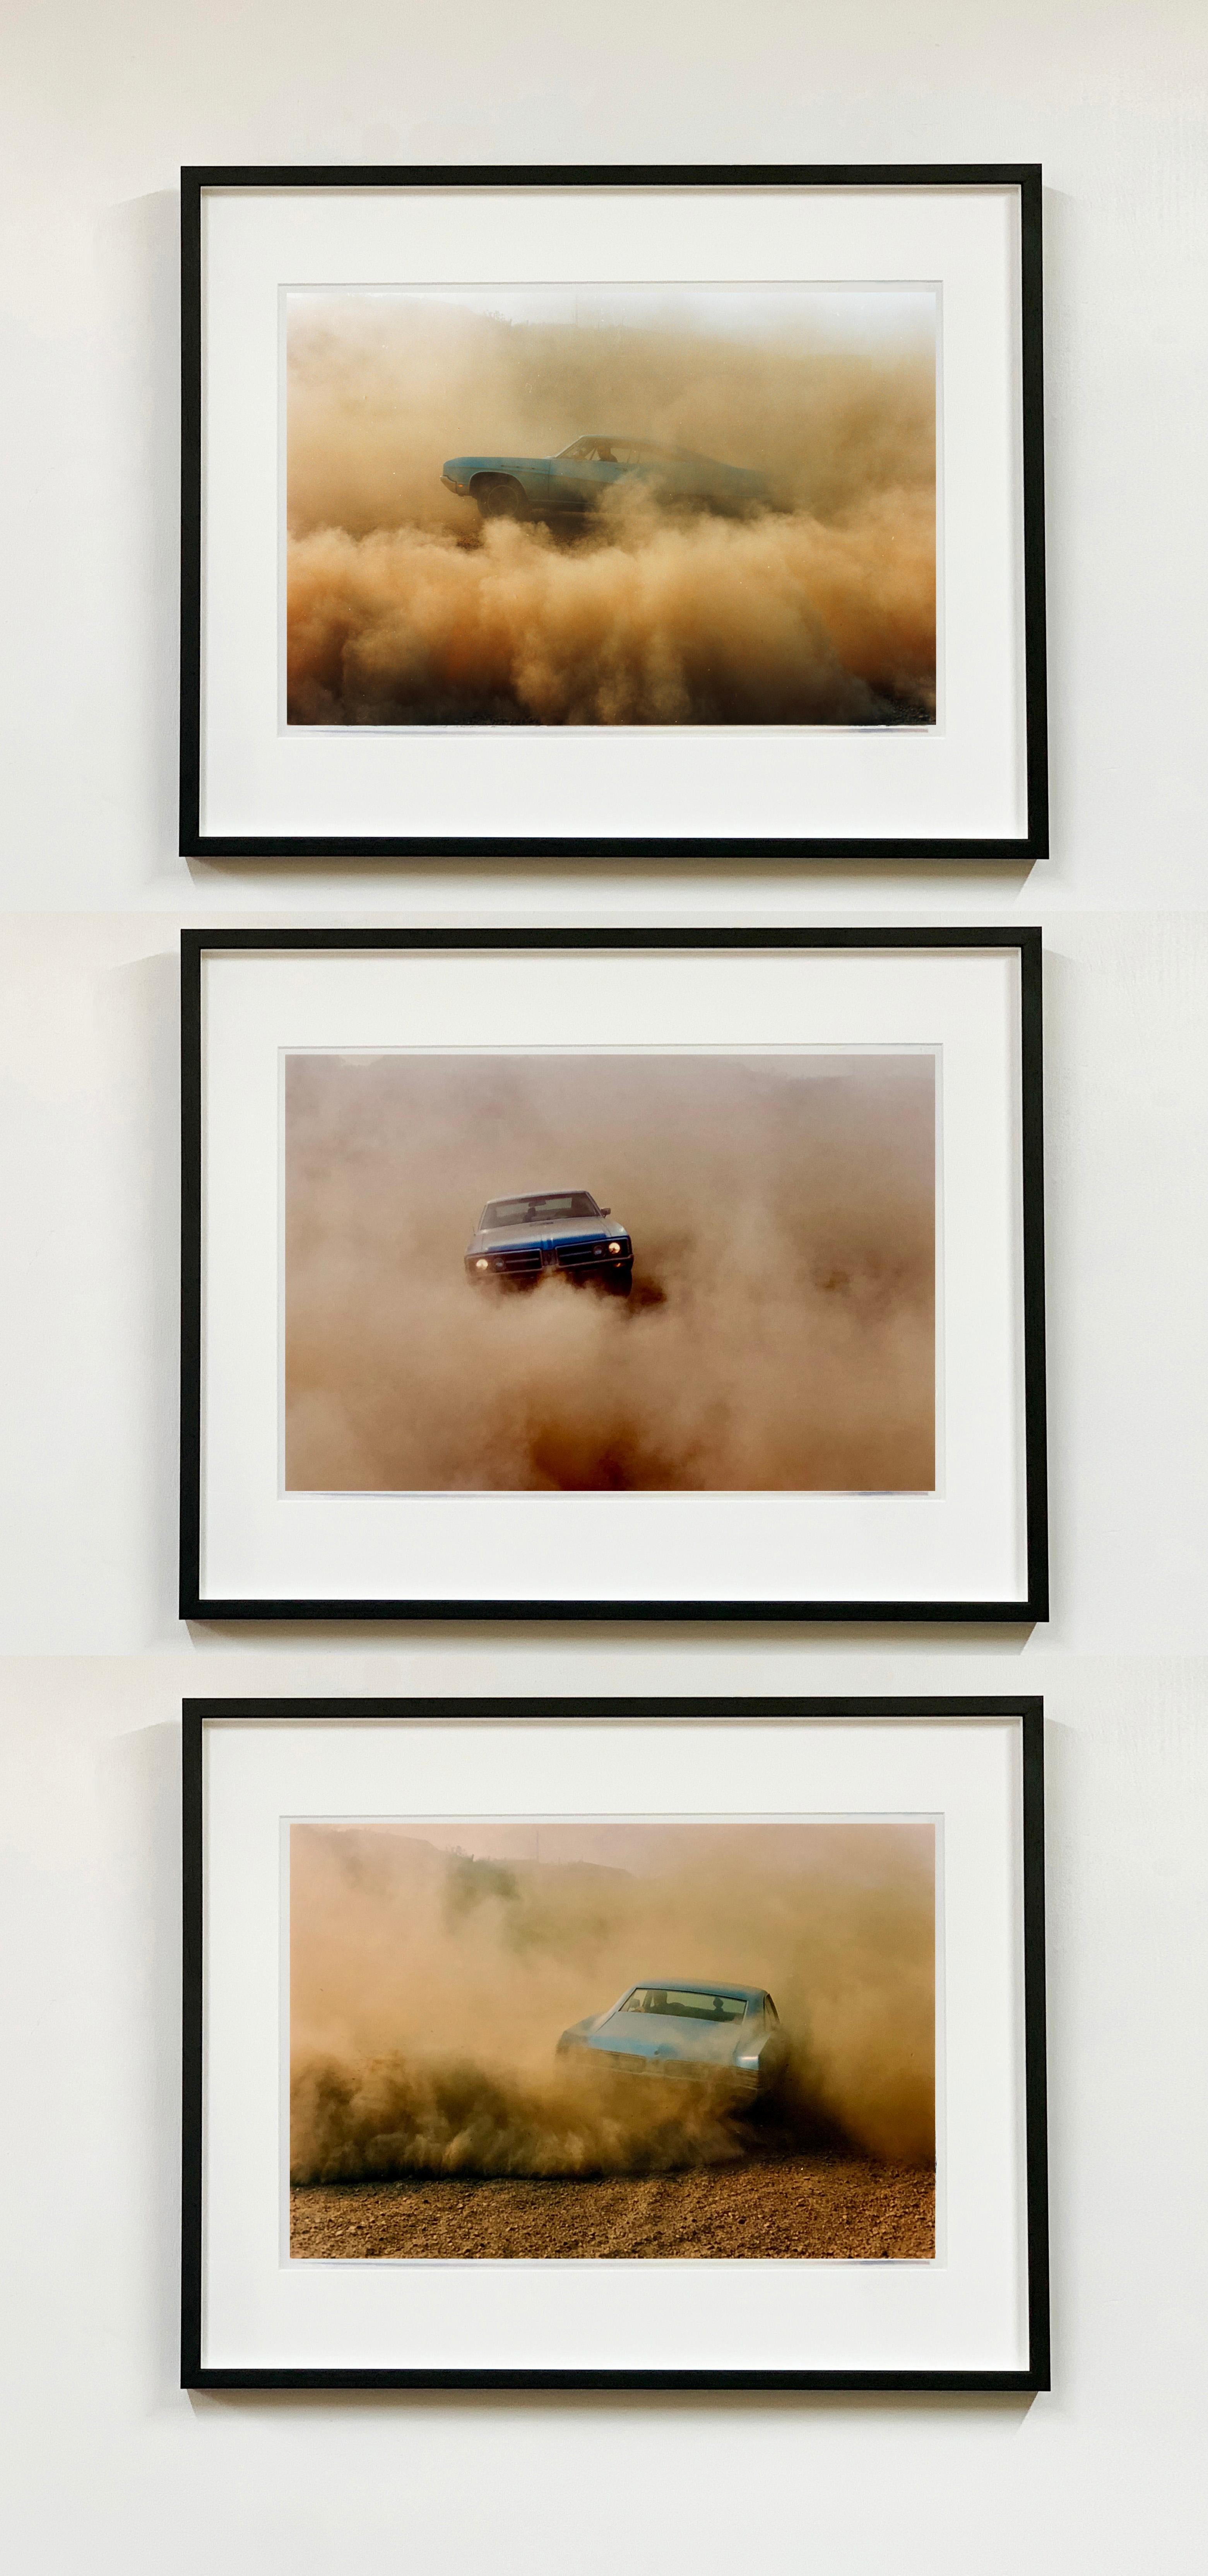 'Buick in the Dust', features an American Car, on a British Beach (Hemsby, Norfolk) driven by a German. Richard spent years honing his skills as a drag racing photographer, a sport he loves which lead his photography career on some amazing journeys.